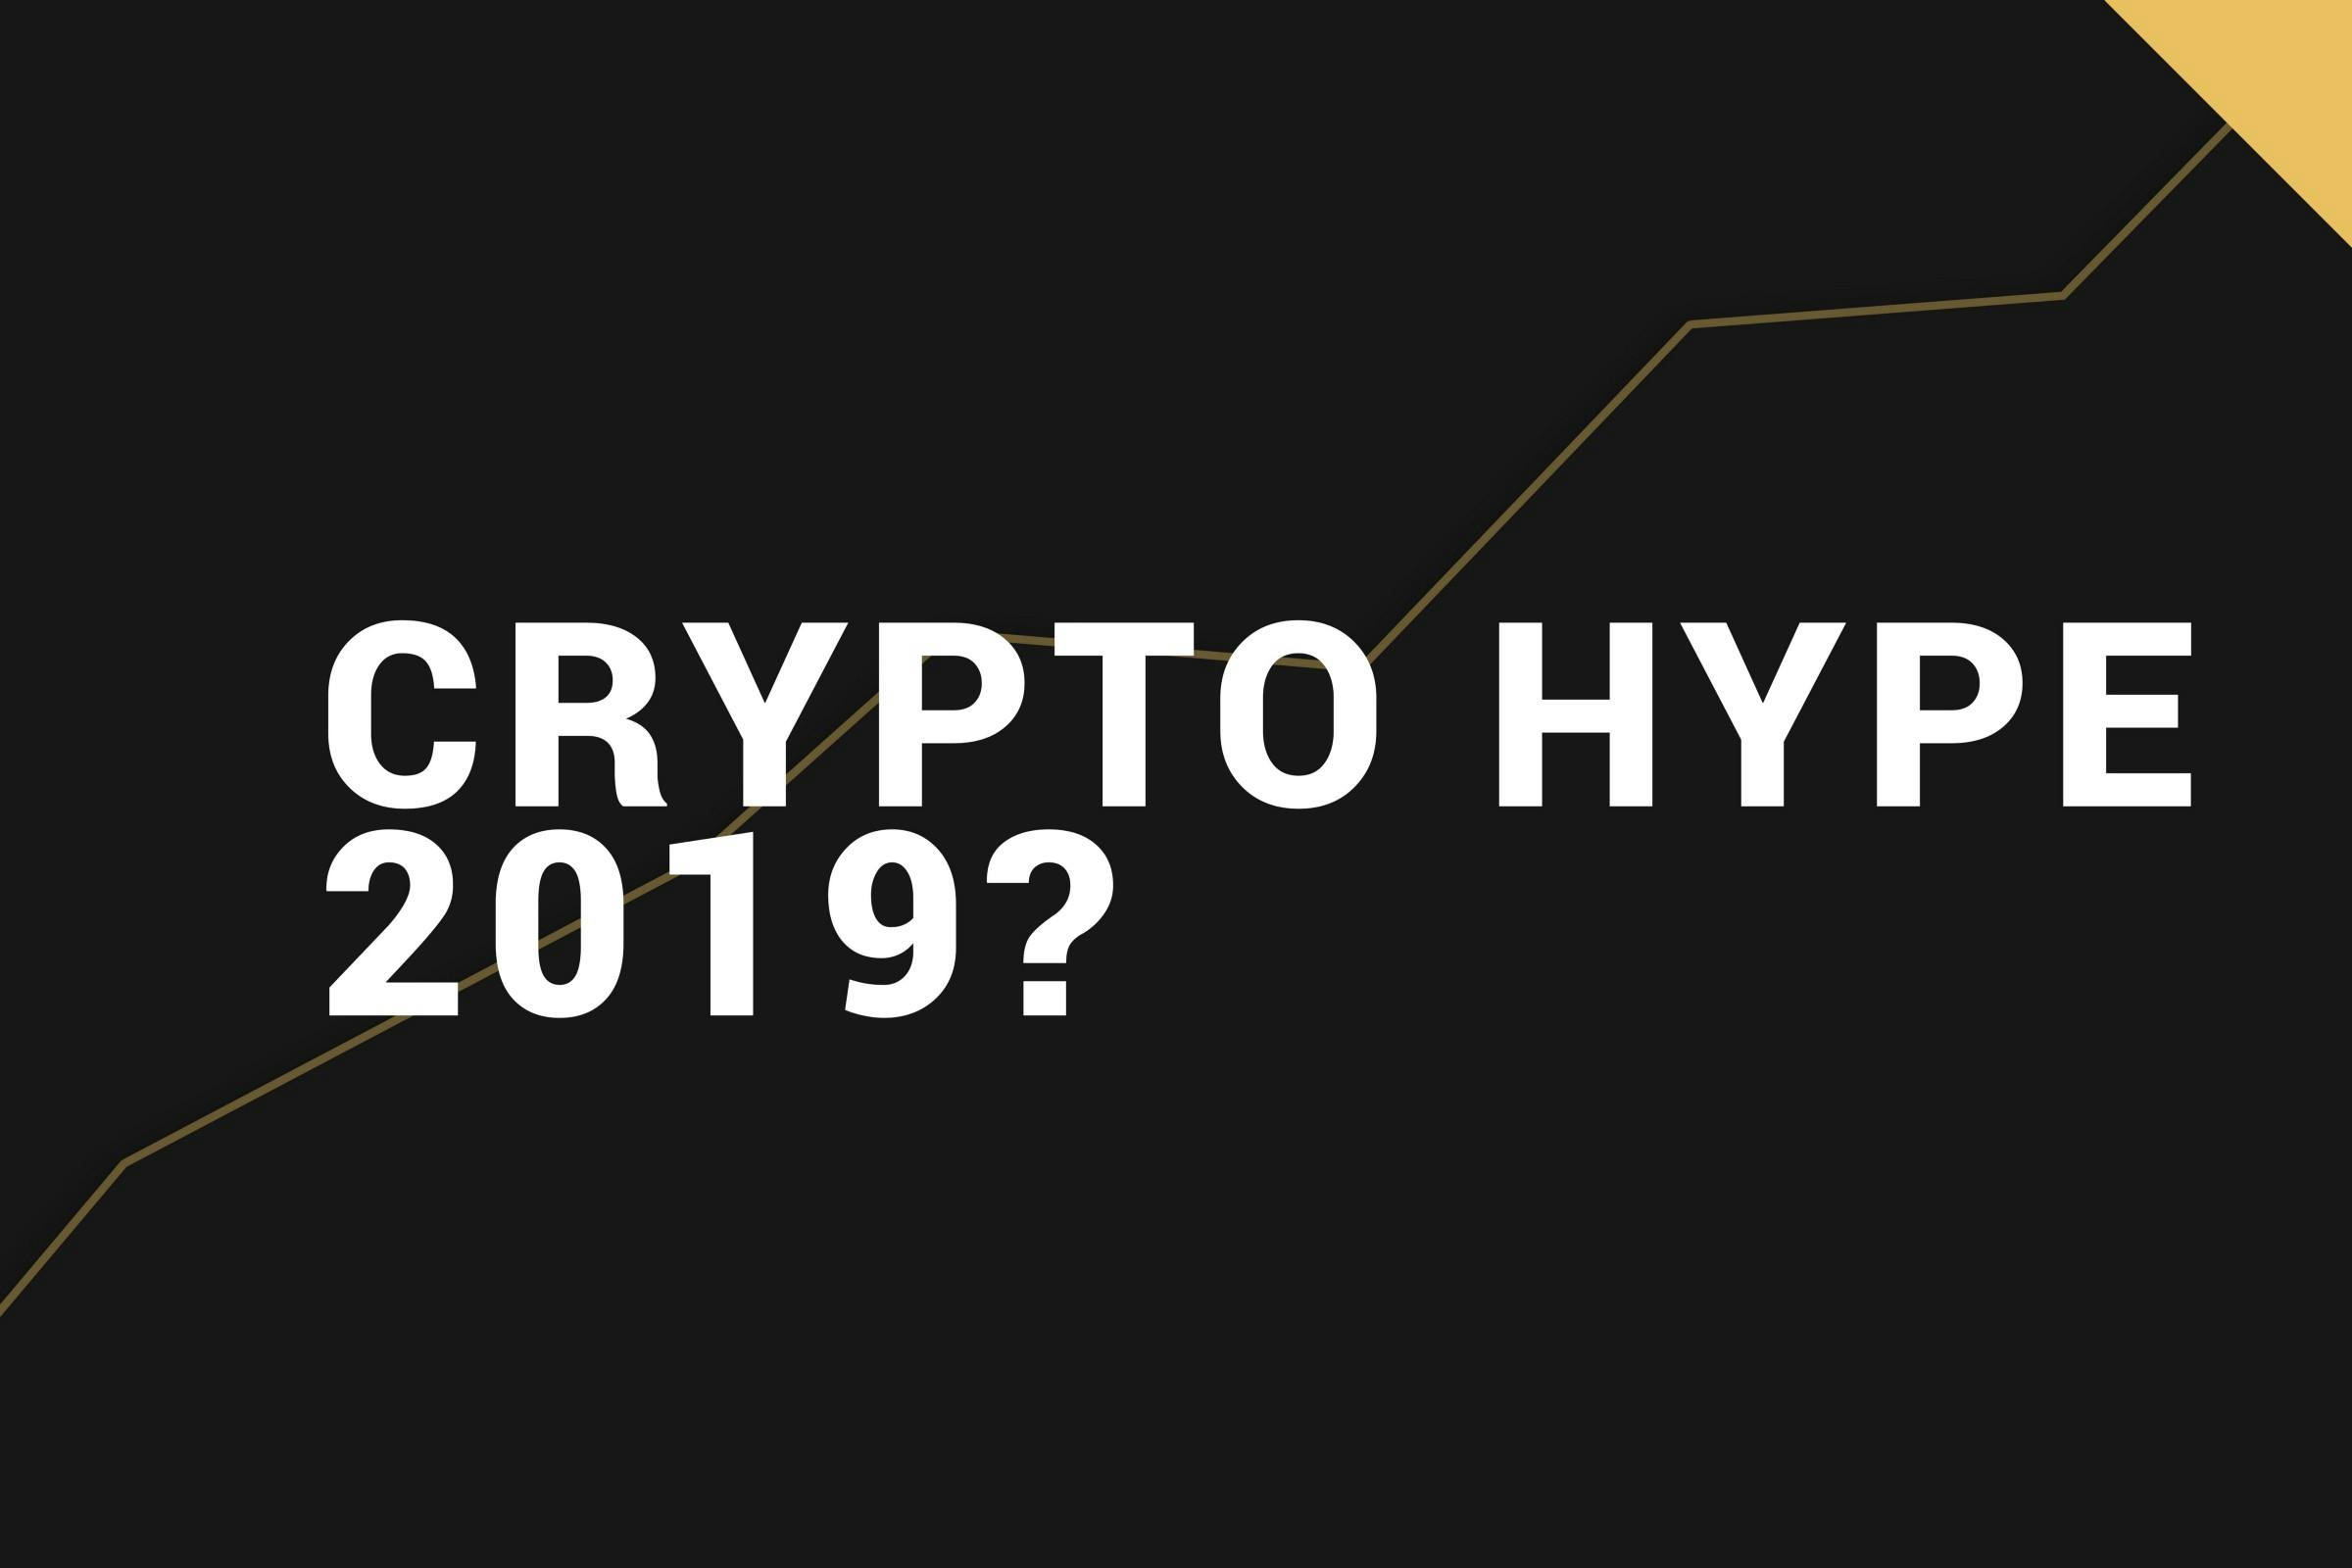 /crystal-ball-3000-will-the-next-crypto-hype-start-in-2019-d005cb743121 feature image